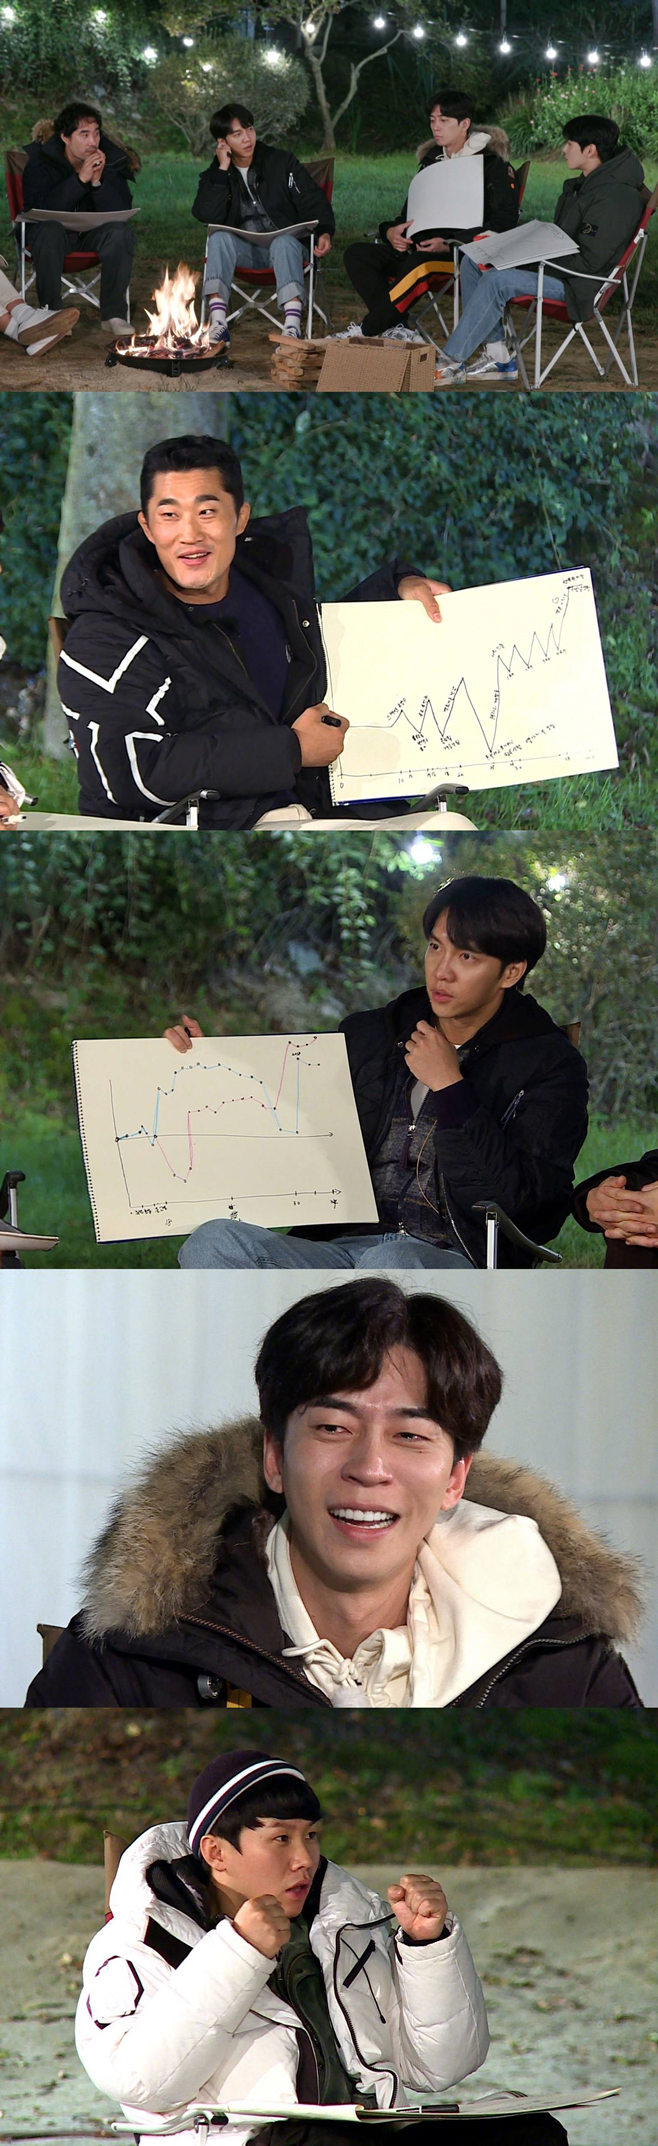 In All The Butlers, singer Lee Seung-gi and broadcaster Kim Dong-Hyun told the hard times.In the SBS entertainment program All The Butlers broadcasted at 6:25 pm on the 25th, the life graphs of Bae Seong-woo and Lee Seung-gi, Yang Se-hyeong, Shin Sung-rok, Cha Eun-woo and Kim Dong-Hyun are revealed.When the recent shooting was ripe for camping night, Bae Seong-woo and All The Butlers members shared their lives by drawing life graphs.They open the graph and openly Confessions about their own life bends.Kim Dong-Hyun briefly quit his workout and revealed his days of part-time jobs, including PC rooms and blocked sewers, and Lee Seung-gi said frankly about the hardest days of his life, saying, I did not hear my hearts voice in the past.Shin Sung-rok was looking at his graph and Bae Seong-woo said, (Shin Sung-rok) really worked hard, and it was full of fighting.I felt such an energy and I was so cool and envious.  (These days) I lived without knowing who I was, he said, I lived really hard, I miss the past, he said, I missed the days of a rookie who was full of passion without knowing anything.The next day, Bae Seong-woo and his members both challenged the sky-going paragliding according to the proposal of Bae Seong-woo.